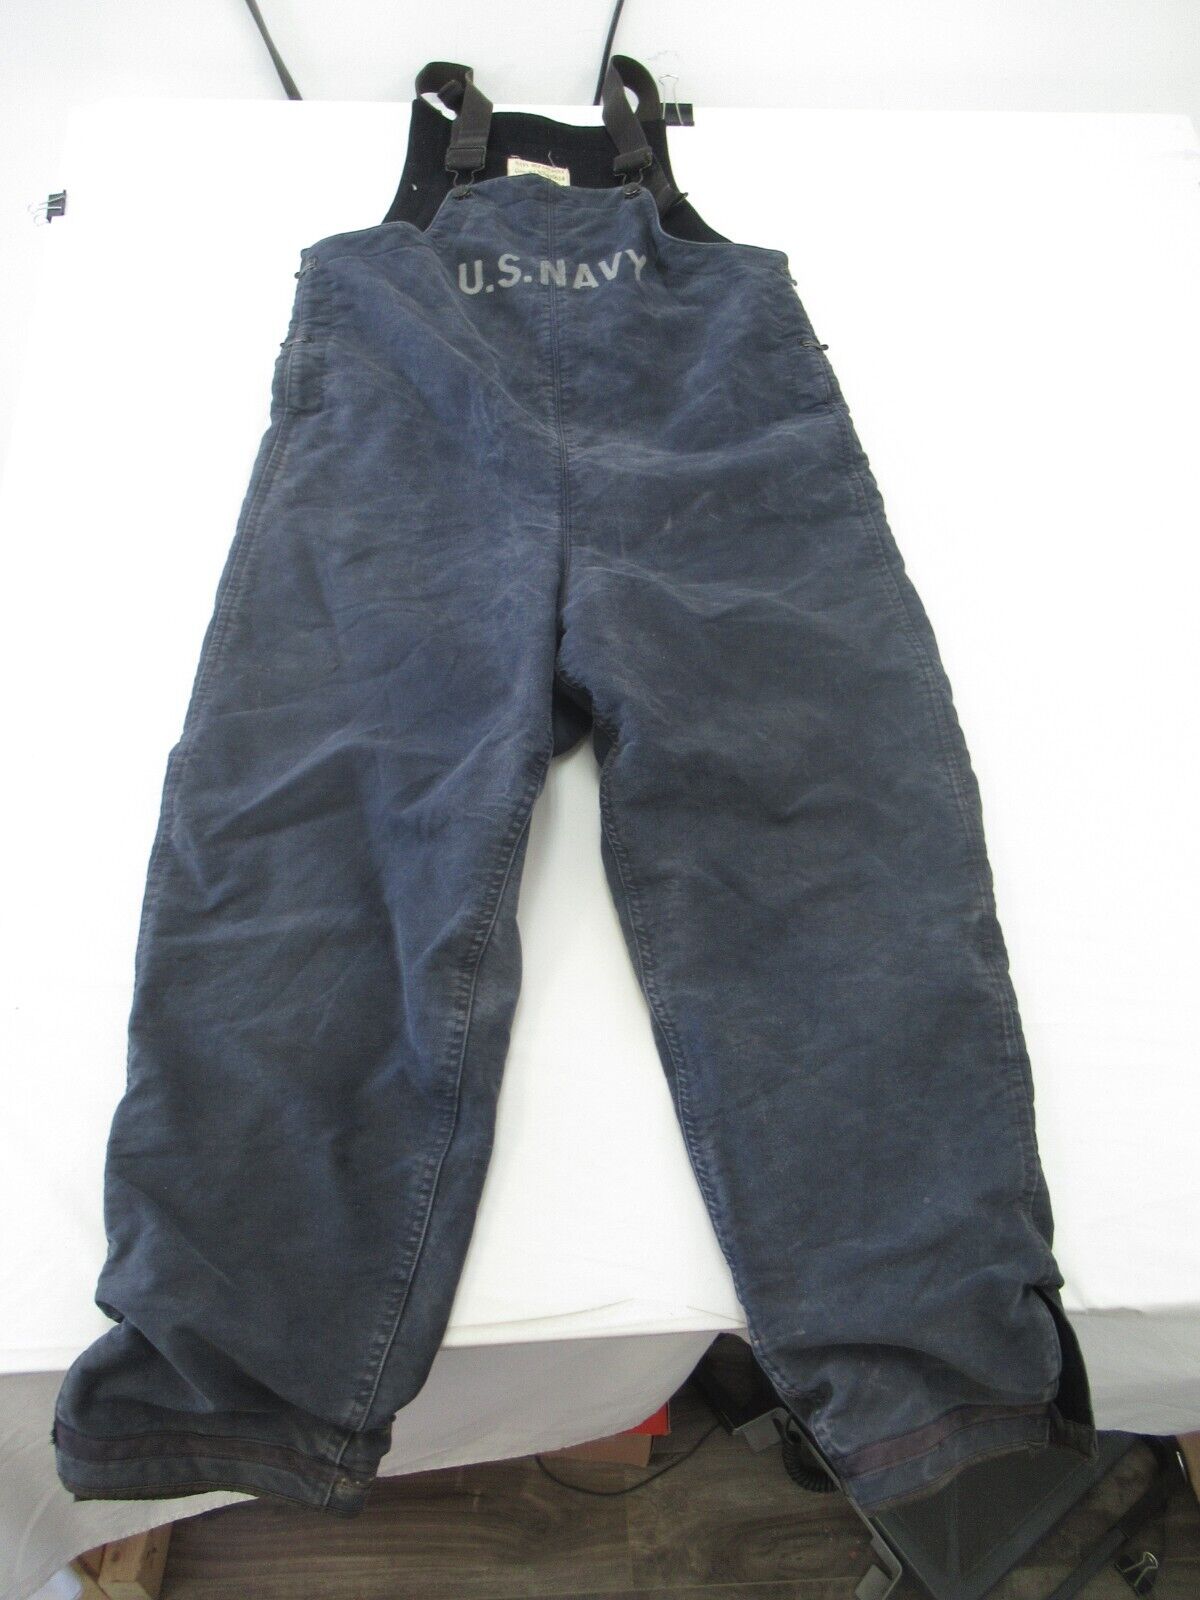 WWII USN Pants Deck Blue Medium 40s Stencil Hook Army Military US Navy Overalls